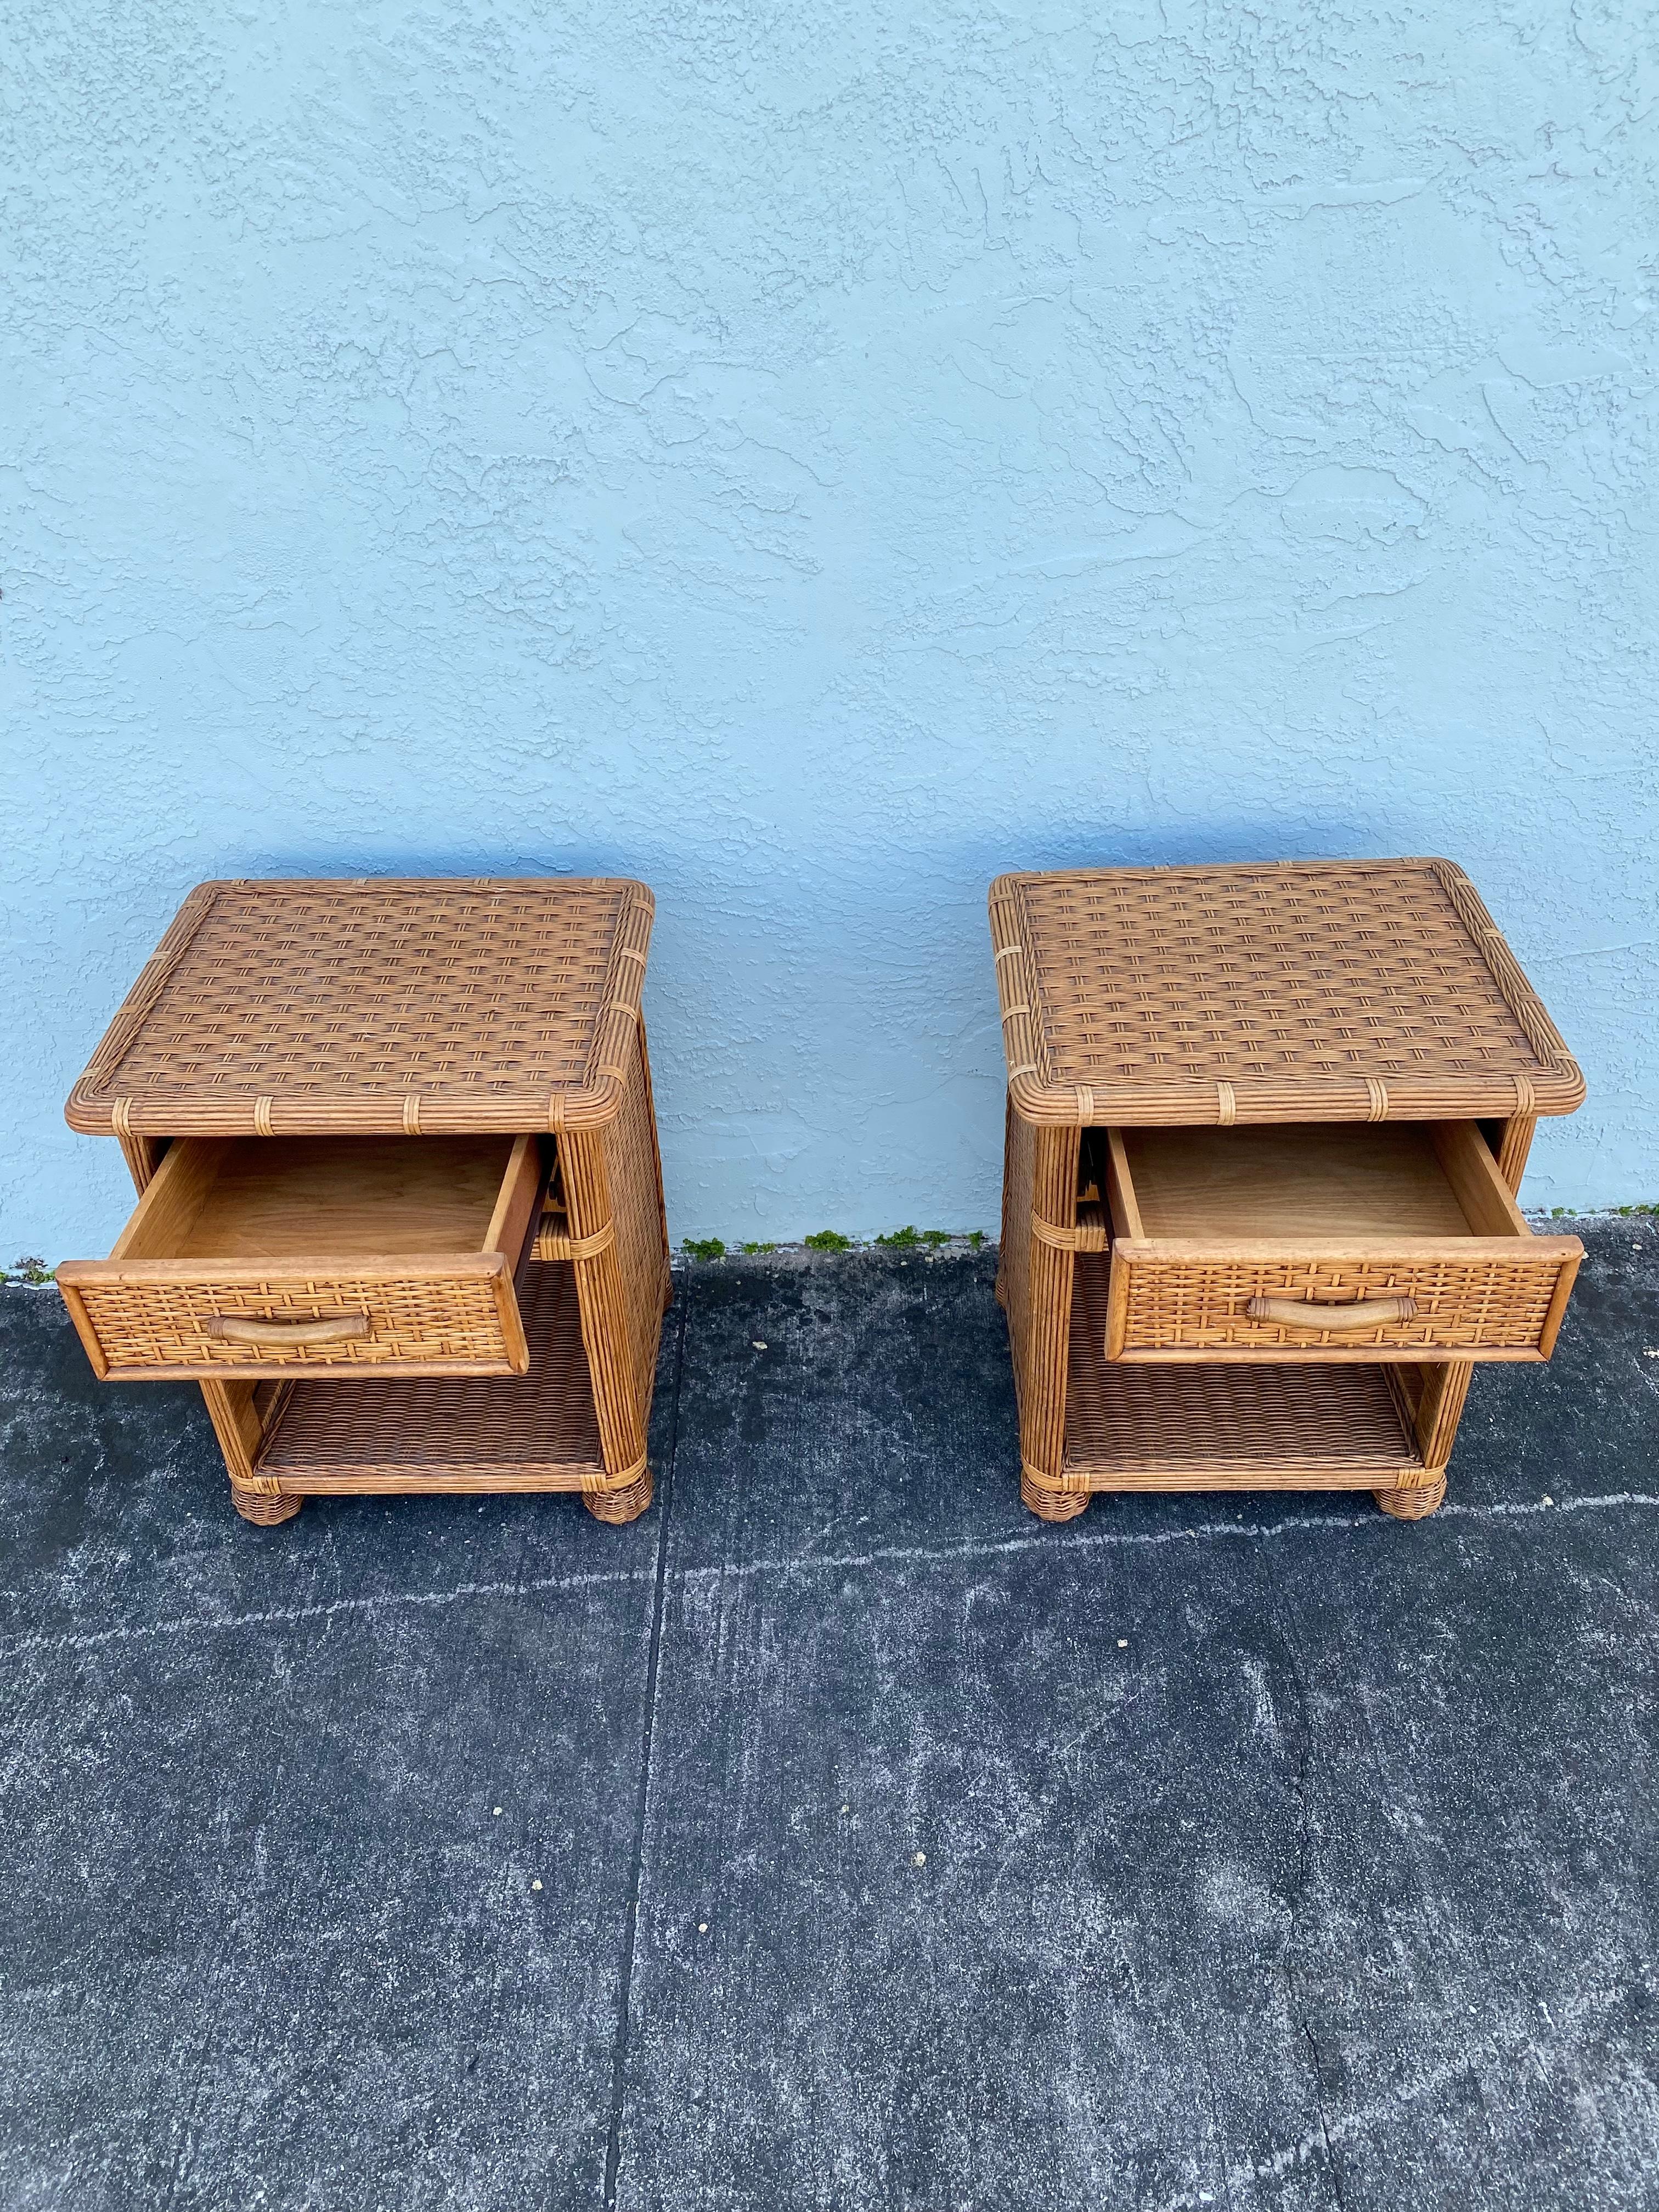 1970s Rattan Wicker End Tables Night Stands, Set of 2 For Sale 1